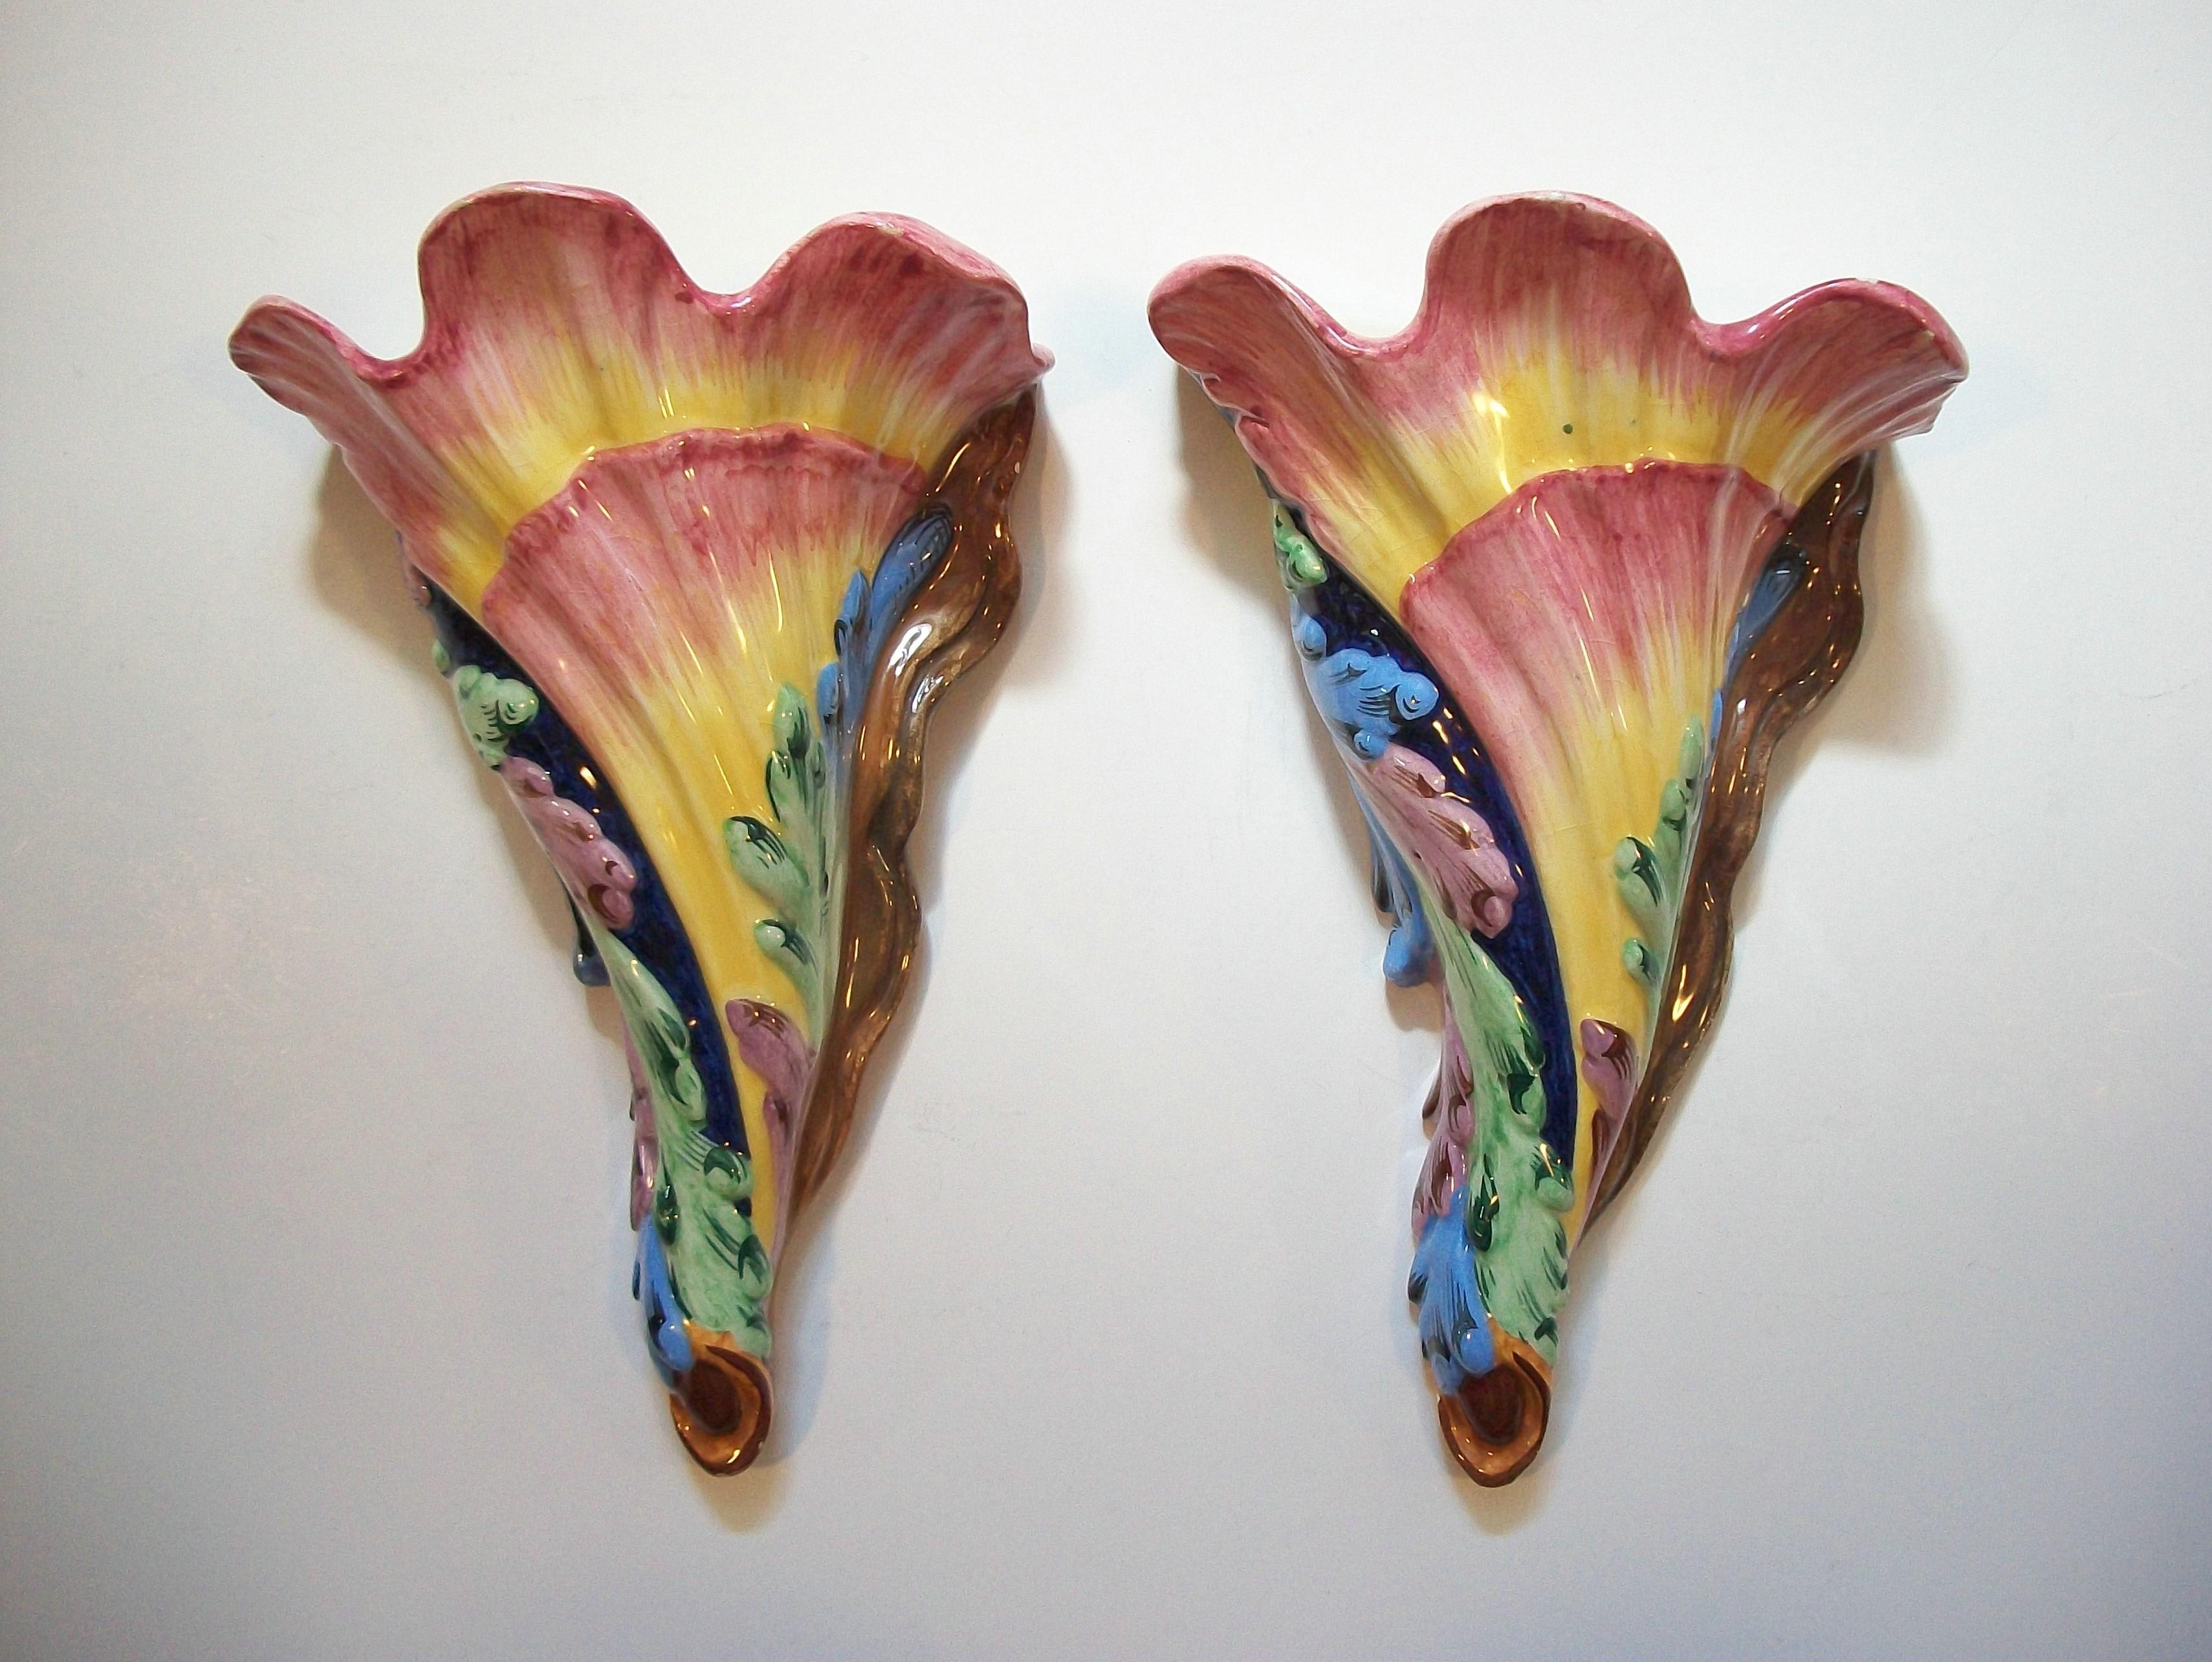 Fine pair of exuberant Hollywood Regency majolica wall pockets - featuring colorful hand painted acanthus leaves set against the trumpet shaped floral body - the glaze with a smooth glossy finish - cream glaze to the interior - the backs left